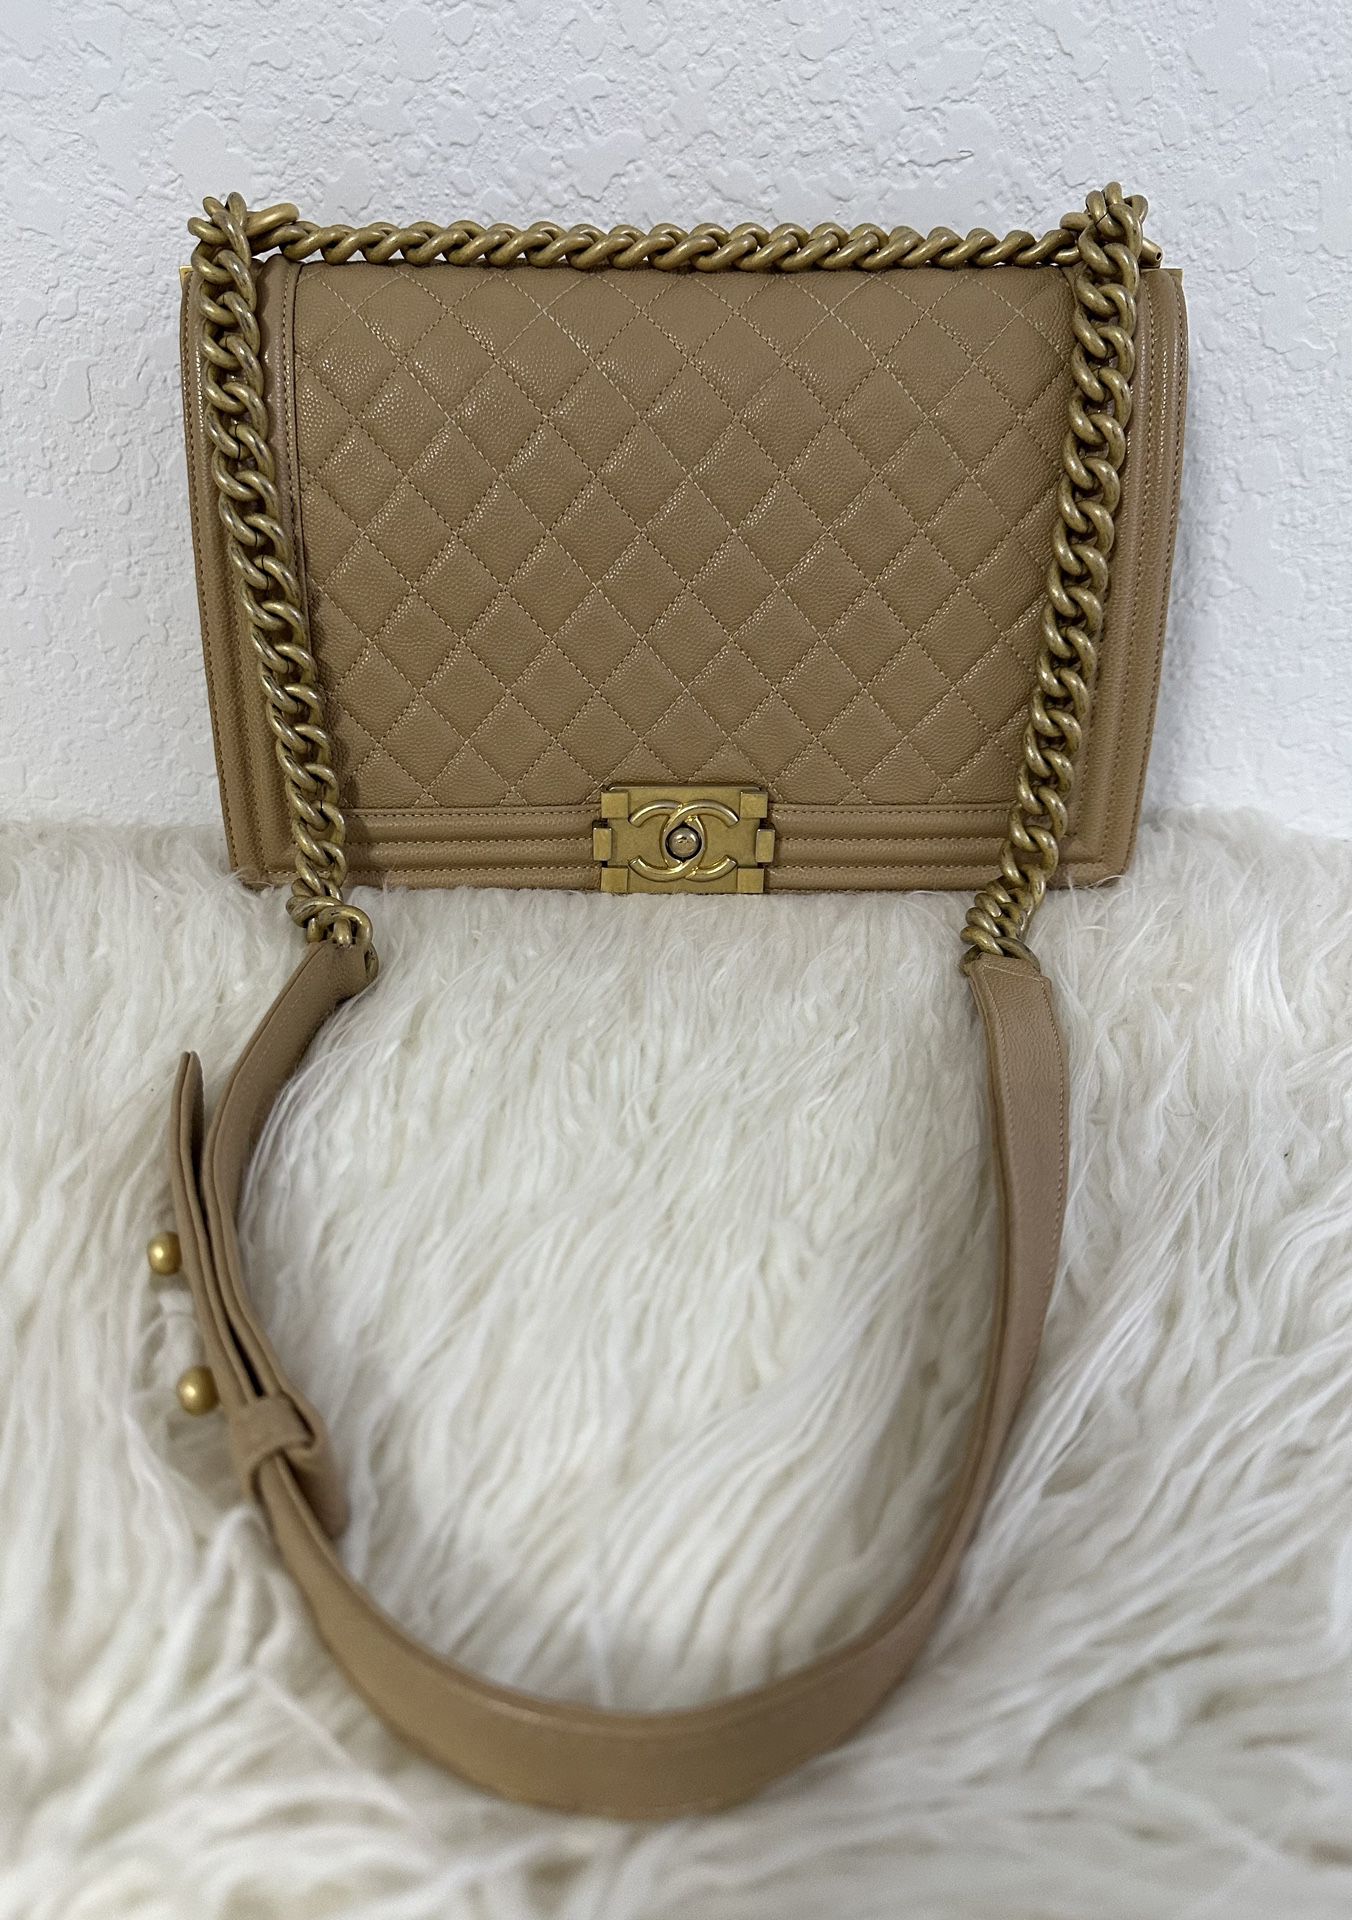 Chanel Beige Quilted Caviar Leather Boy Flap Bag Authentic 